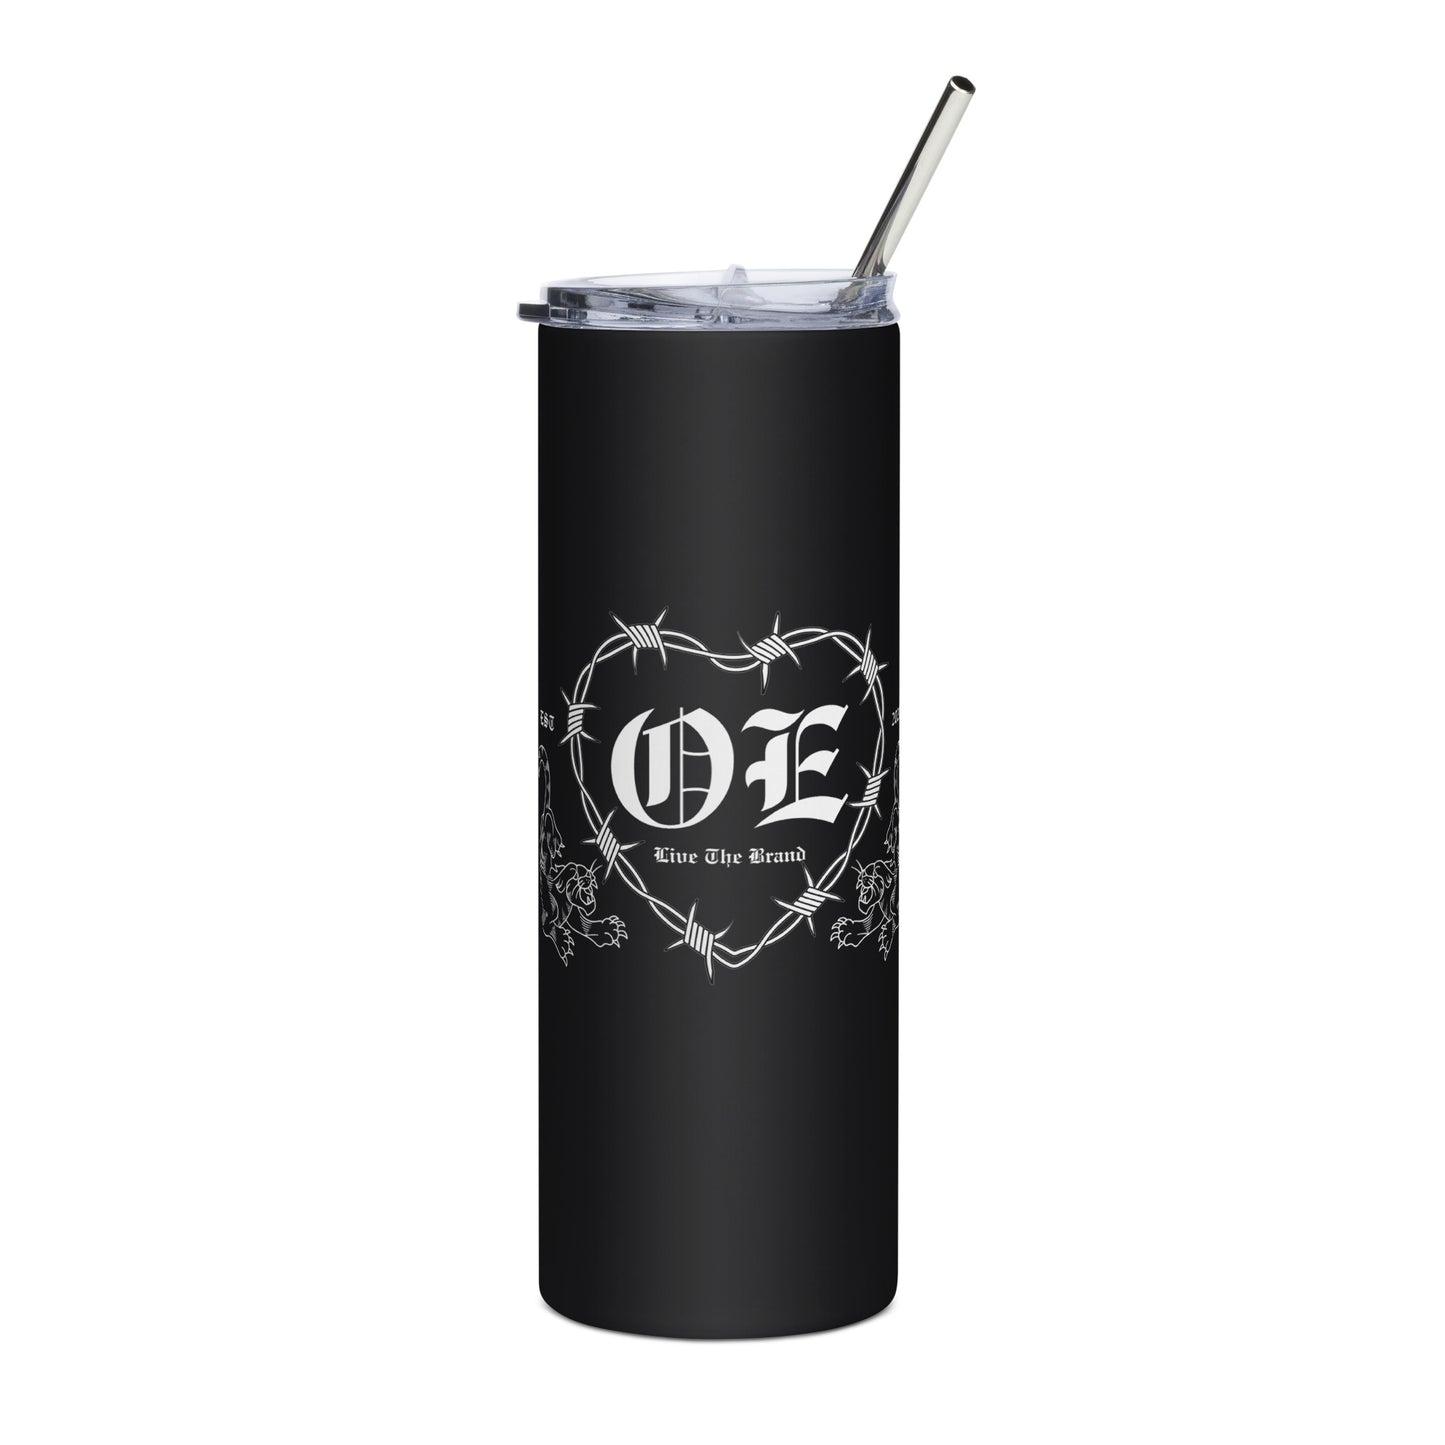 OE Barb wire Stainless steel tumbler